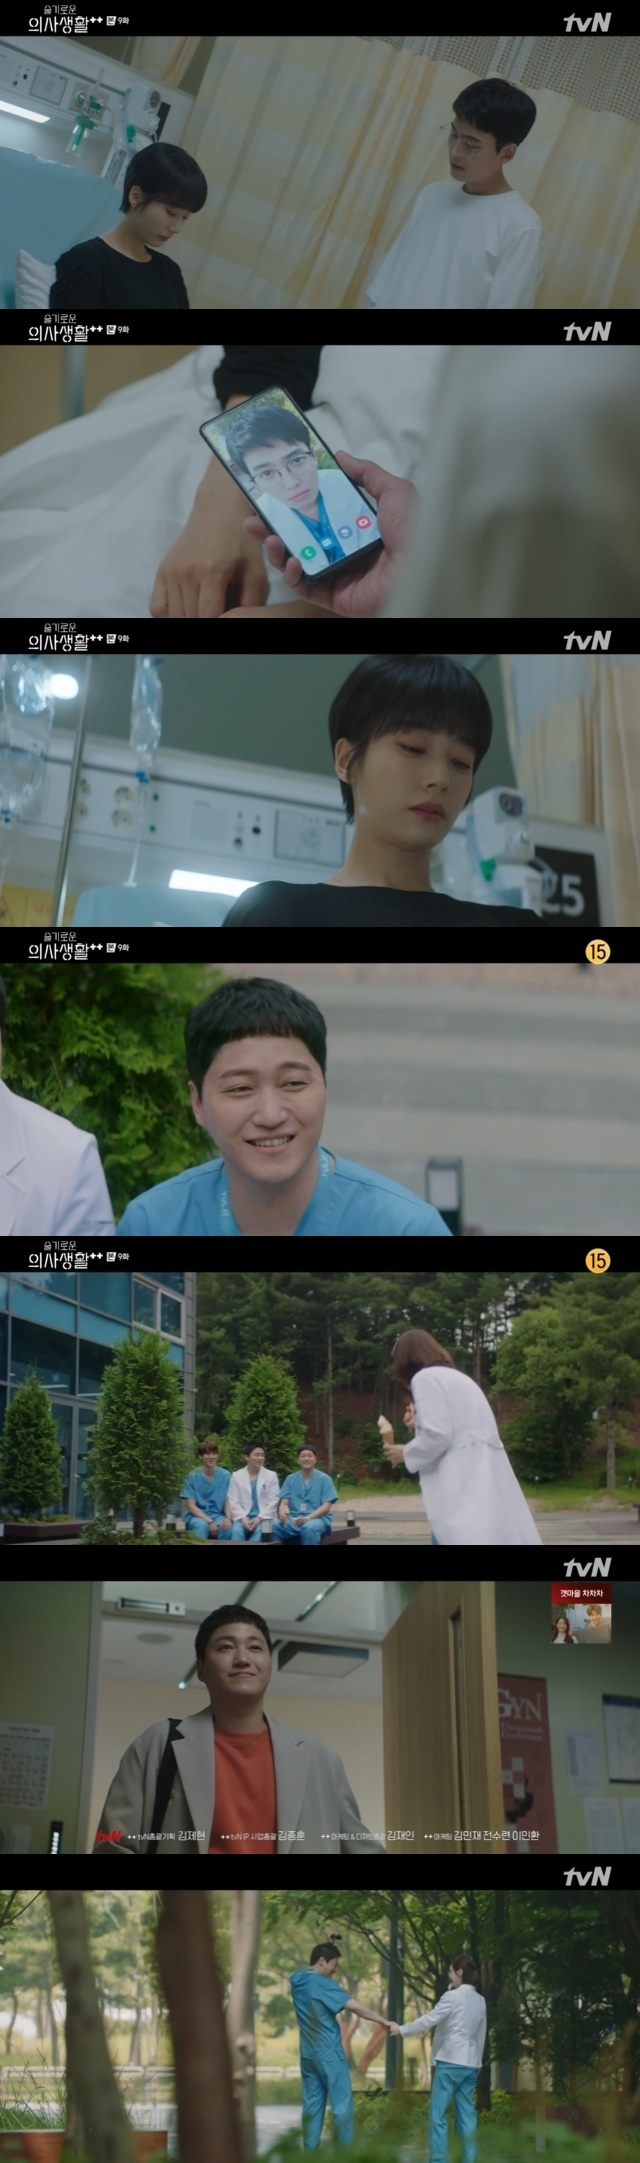 With Jung Kyung-ho and Kwak Sun-Young finally confirming their unchanging sincerity, Kim Dae-myung is also hinted at going straight for Ahn Eun-jin, and the romance of the 99s has hit the brink.In the 9th episode of TVNs Thursday drama Spicy Doctor Life Season 2 (playplayplayed by Lee Woo-jung and directed by Shin Won-ho), which was broadcast on August 19, 99-z romance, which had been stagnant, began to speed up.At the end of last weeks broadcast, Kim Joon-wan (Jung Kyung-ho), who led the hot reaction with a chance reunion on a high-speed bus, and Lee Ik-sun (Kwak Sun-Young) were the first to be recognized.Lee Ik-suns mobile phone background screen was still Kim Joon-wan, and Lee Ik-joon, who learned about the fuss, deliberately booked Kim Joon-wans bus ticket at the same time as Lee Ik-sun.Kim Joon-wan did not miss the opportunity to come and asked Lee Ik-sun first, I want to meet you if you are in Seoul until the weekend. I want to talk to you for a while.Lee Ik-sun did not refuse it.But Lee Ik-suns illness also became an obstacle. On the day of his appointment with Kim Joon-wan, he suddenly became feverish and headed to the hospital with his appointment canceled.I do not know that Lee Seon-soon has recurred and unilaterally said, I can not keep my promise today. Suddenly I am not feeling well.Im sorry, brother, Kim Joon-wan, who received the message, could not hide his confused mind.Lee Ik-jun played again.He found out that Lee was a Kim Joon-wan, and he immediately called Kim Joon-wan and said, My brother suddenly got a lot of fever and brought him to the emergency room.Im in the process of getting my sap and Im glad Im down. Im going home after all the sap, and its going to take an hour to get my sap done.My brother told me not to be next to me, so I am my room. Kim Joon-wan rushed straight to the hospital and only then found out why Lee Ik-sun was sick and said goodbye.He found out that the background of his cell phone was his picture, and he was convinced that Lee was also his mind.On the other hand, there was a strange change in Kim Dae-myung.Yang Seok-hyung, who was thinking about something, told Friend Ahn Jung-won (Yoo Yeon-seok), I am thinking that my troubles are over and I am thinking.The relationship between Yang Seok-hyungs concerns and Chu Min-ha (Ahn Eun-jin) was later revealed in his changed behavior.Yang Suk-hyung bought himself ice cream, or looked at Chu Min-ha, who received the same charm of Lee Ik-joons finger heart, with a much warmer look than before.She laughed at every move.So, Lee said, I do not know his mind, do you? And Ahn Jung-won, who heard about Yang Seok-hyungs troubles, said, Seok-hyung will know exactly.Im still thinking about it, and Im thinking about it. Its slow, but its slow, but Im thinking about it later and trying to get it straight.I have a lot of mountains to overcome, he said. Did not you see the stone shape? Game is over. Friends already saw the relationship between Yang Seok-hyung and Chu Min-hwa was the situation of Game end.After that, I was nervous to use the opportunity of confession once in five times, and Yang Seok-hyung stood in front of someone with a somewhat cheerful expression.Ahn Jung-won, who said Game End after the appearance of Yang Seok-hyung, raised the expectation of viewers cheering for the bear couple, saying, This is also a bear of faith.